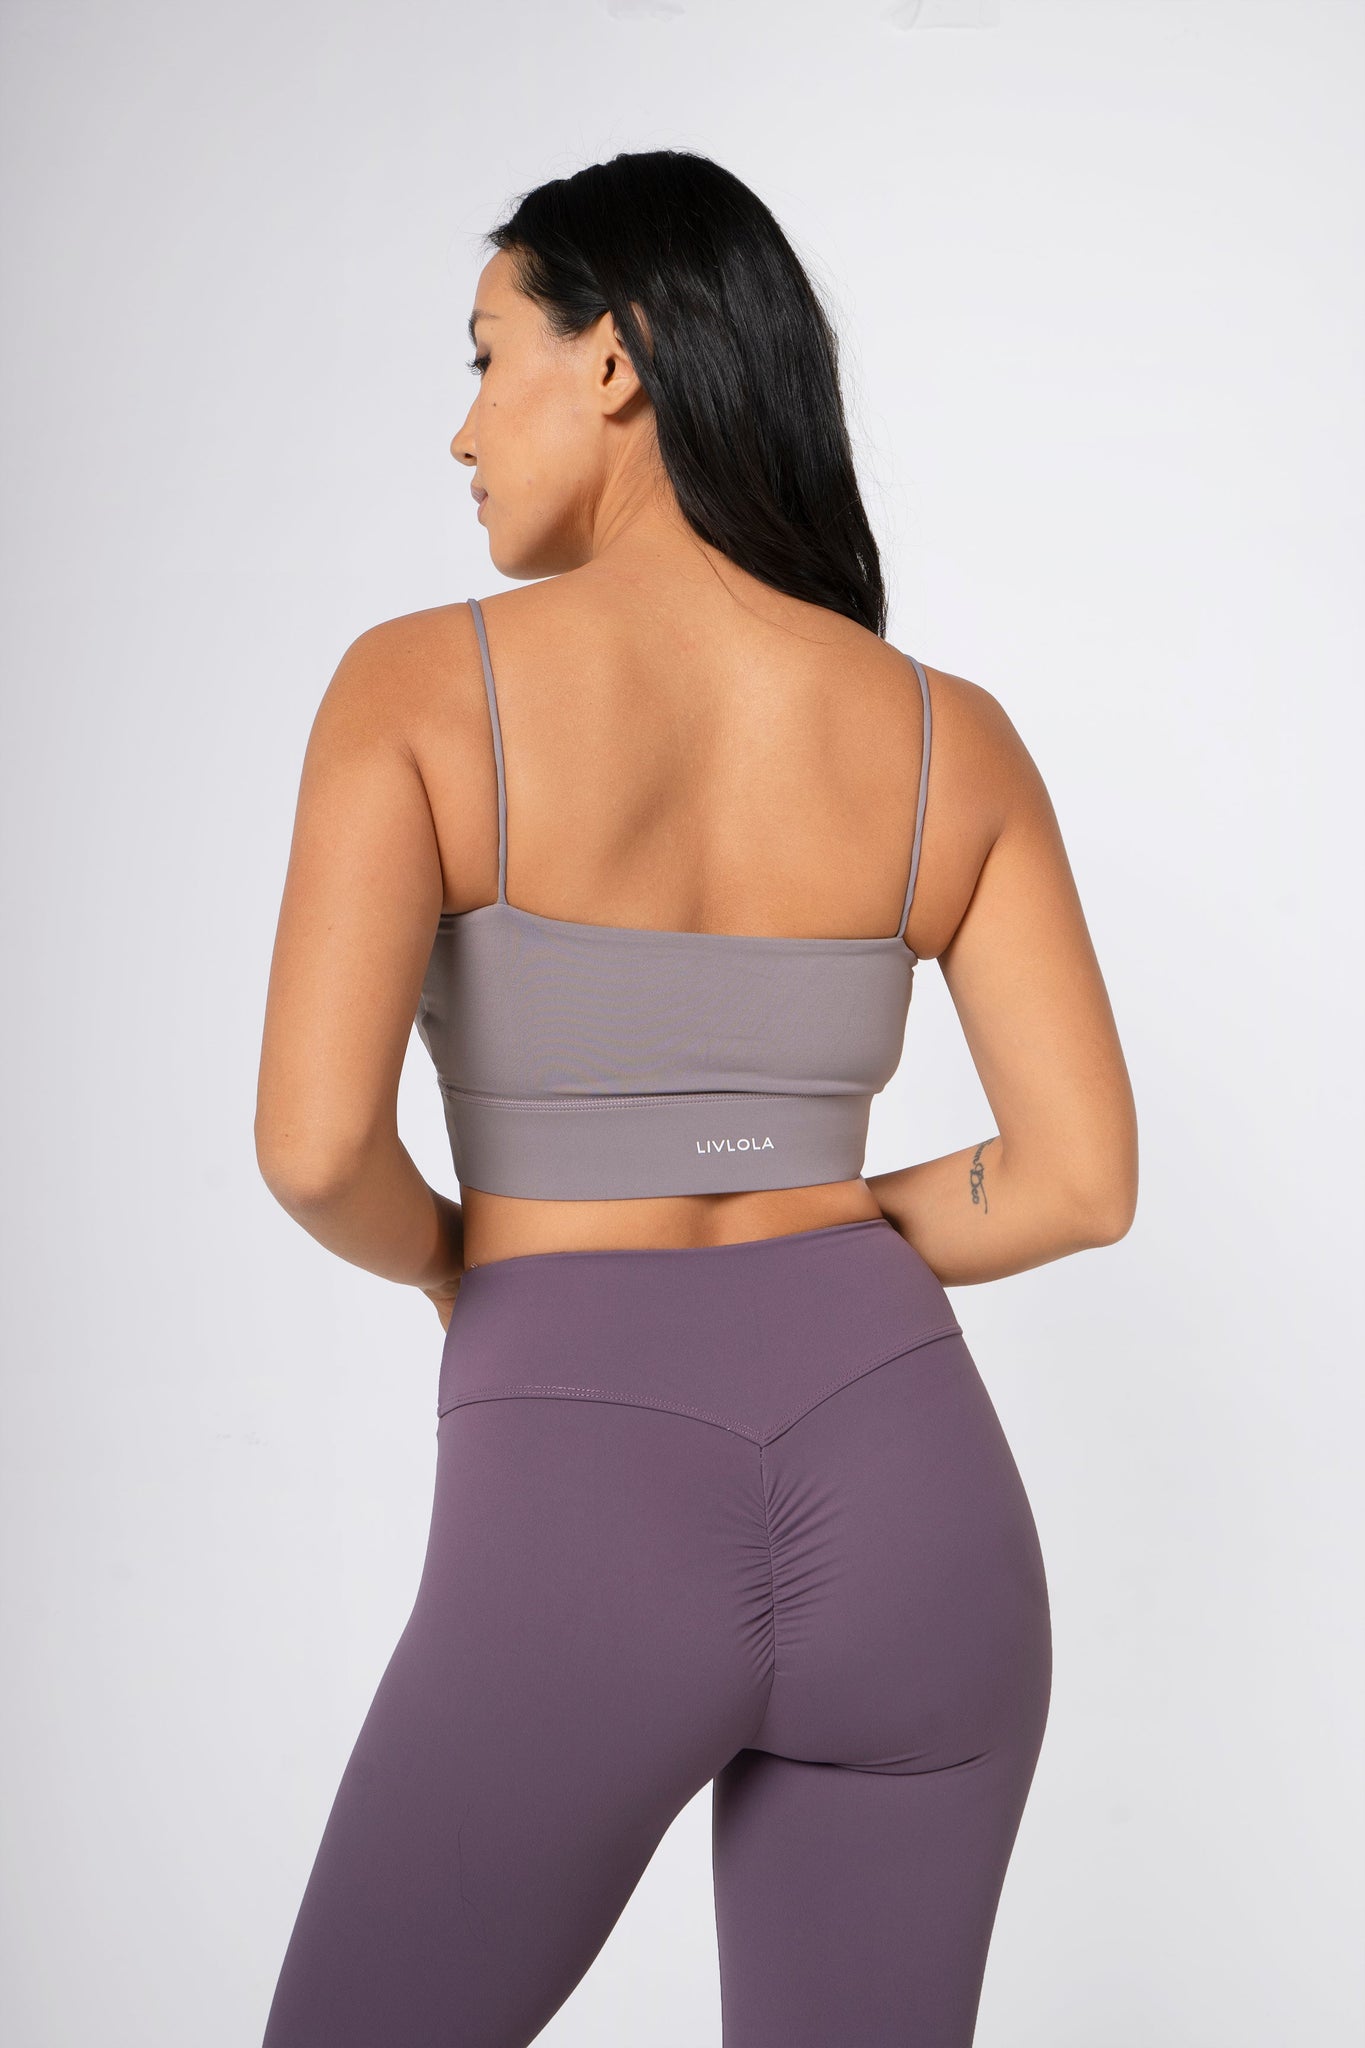 The Upside Bra [2-Piece Top Only]